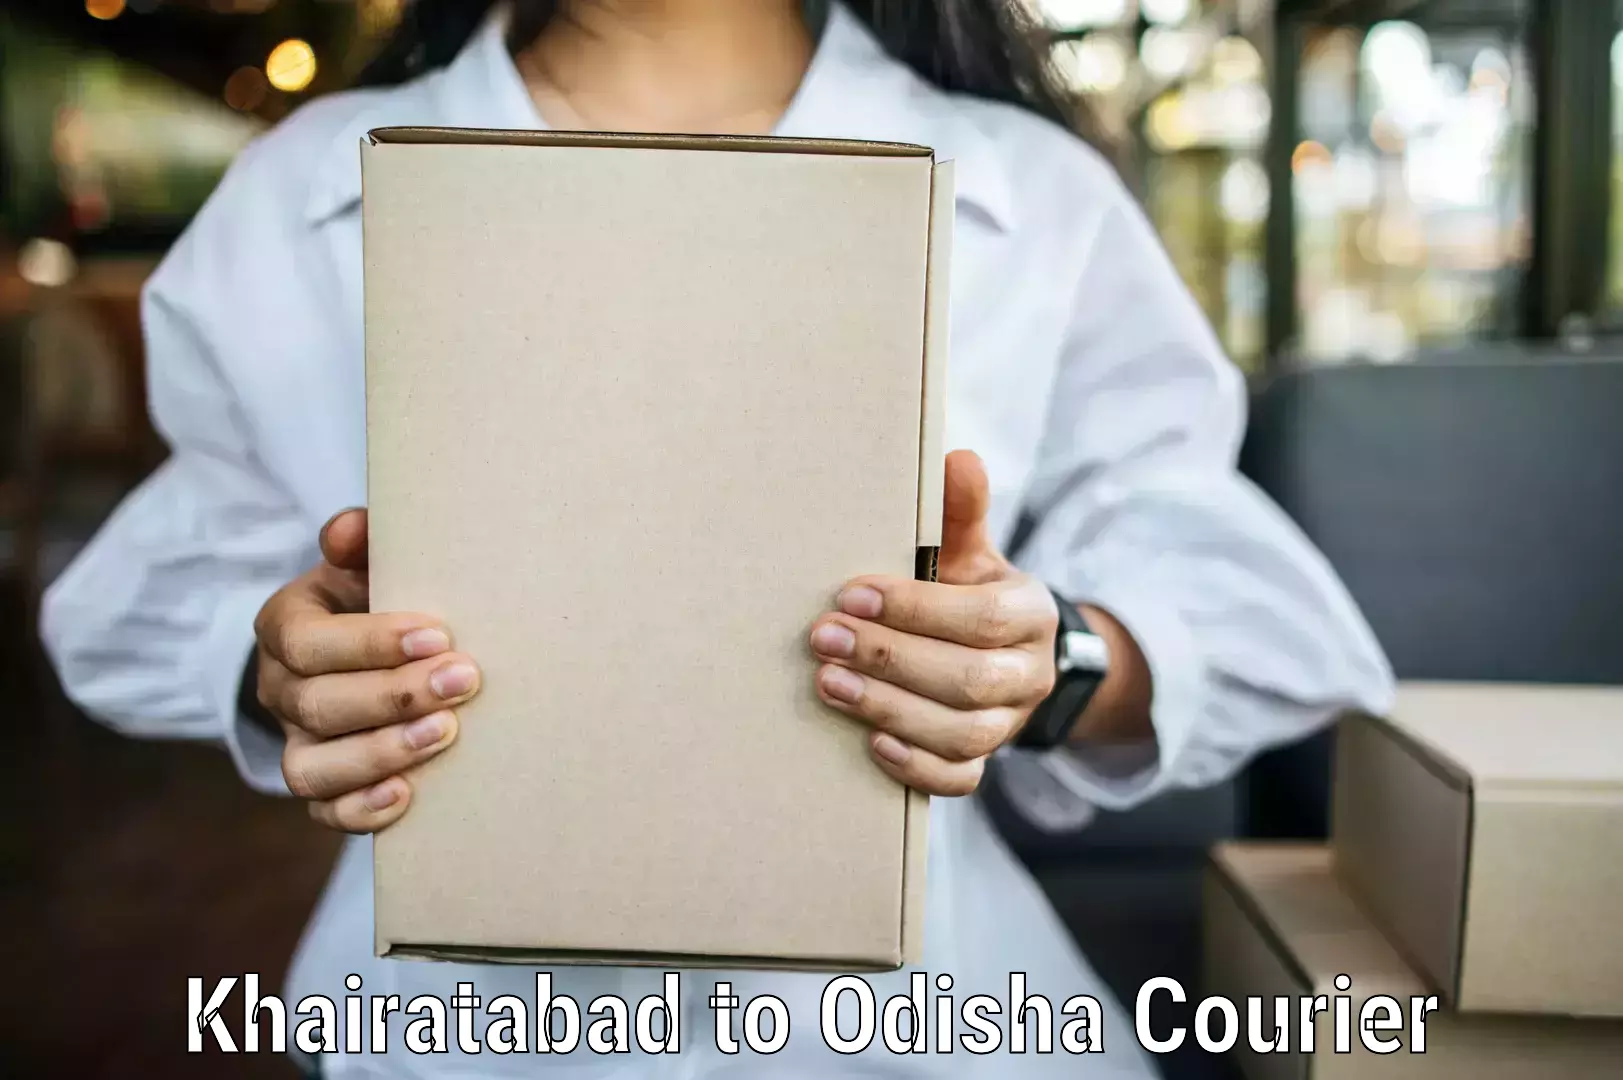 Modern courier technology Khairatabad to Bonth